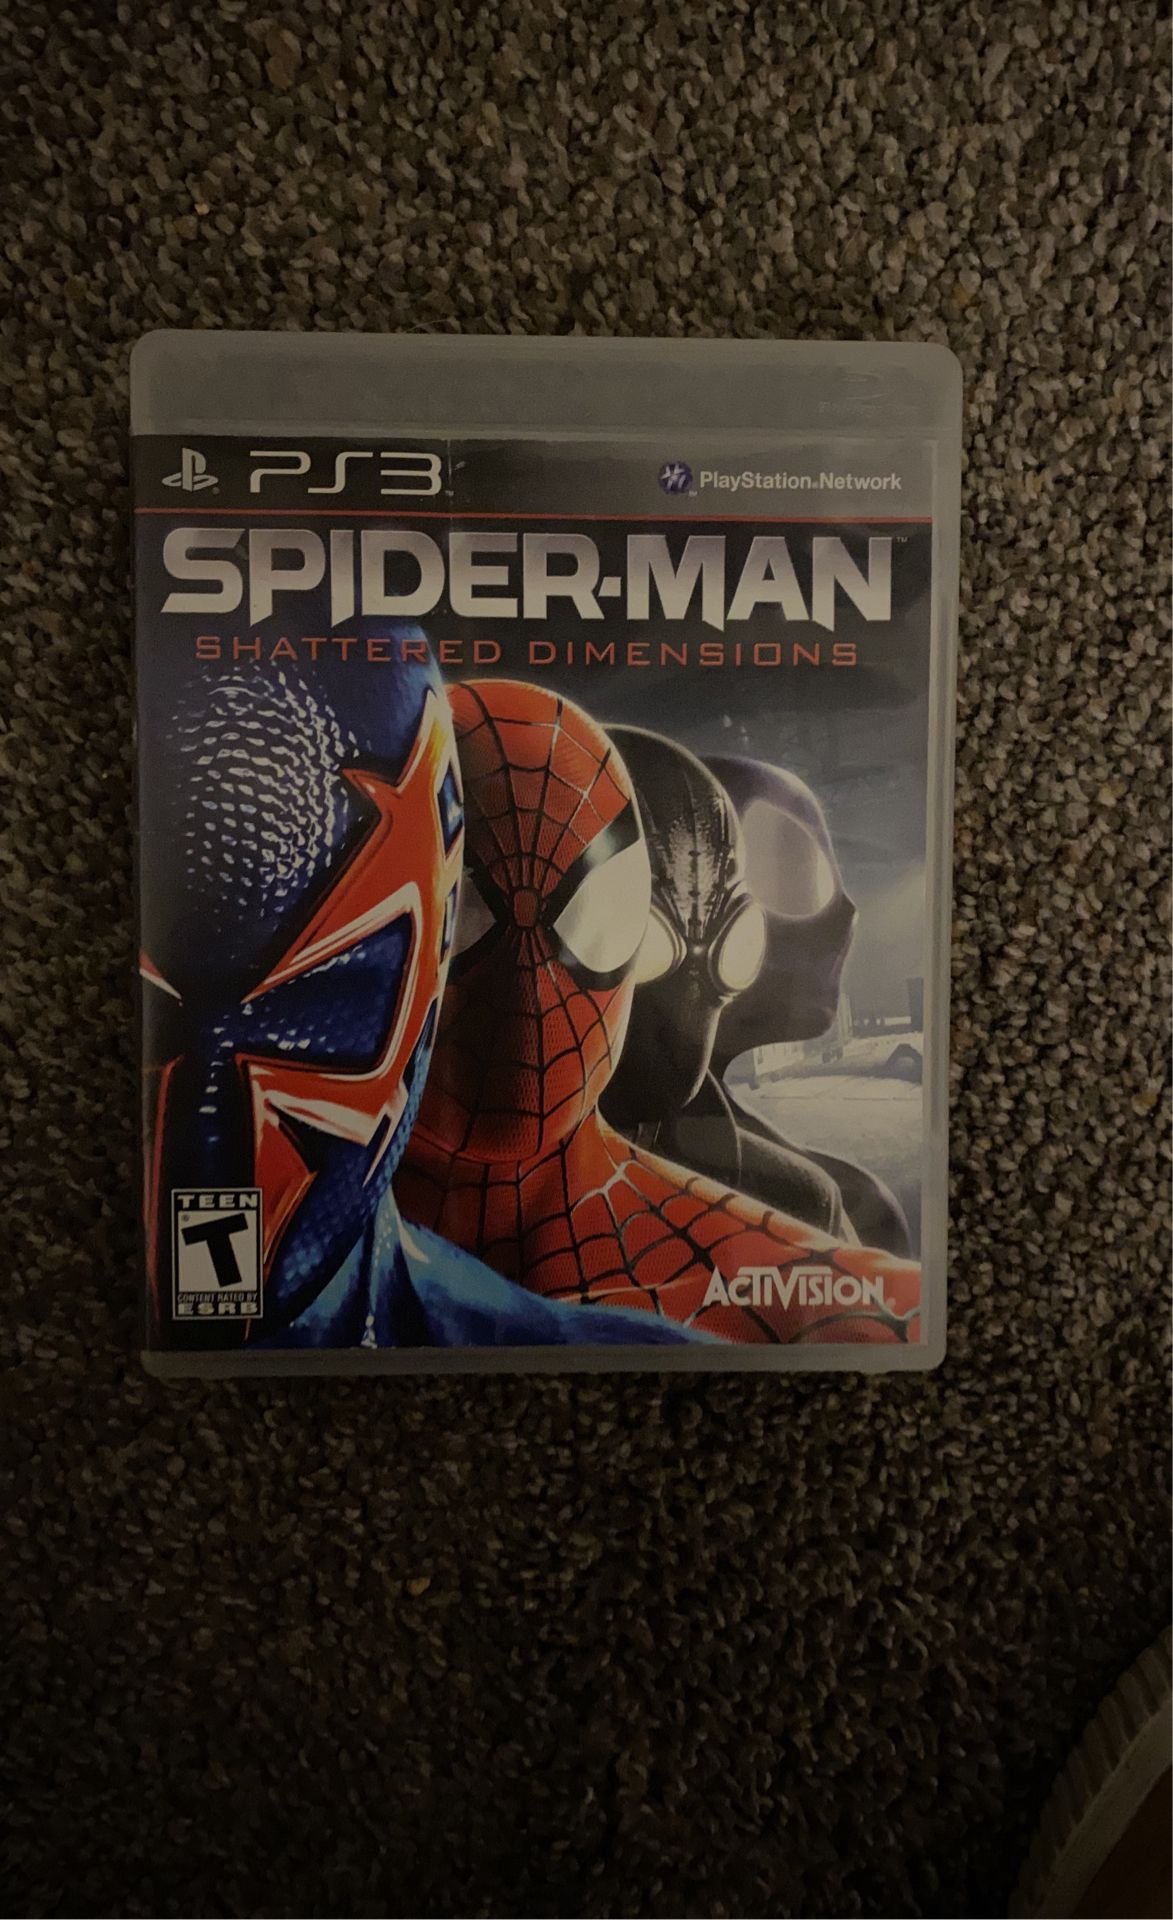 Spider-Man Shattered Dimensions PS3 PlayStation 3 for Sale in San